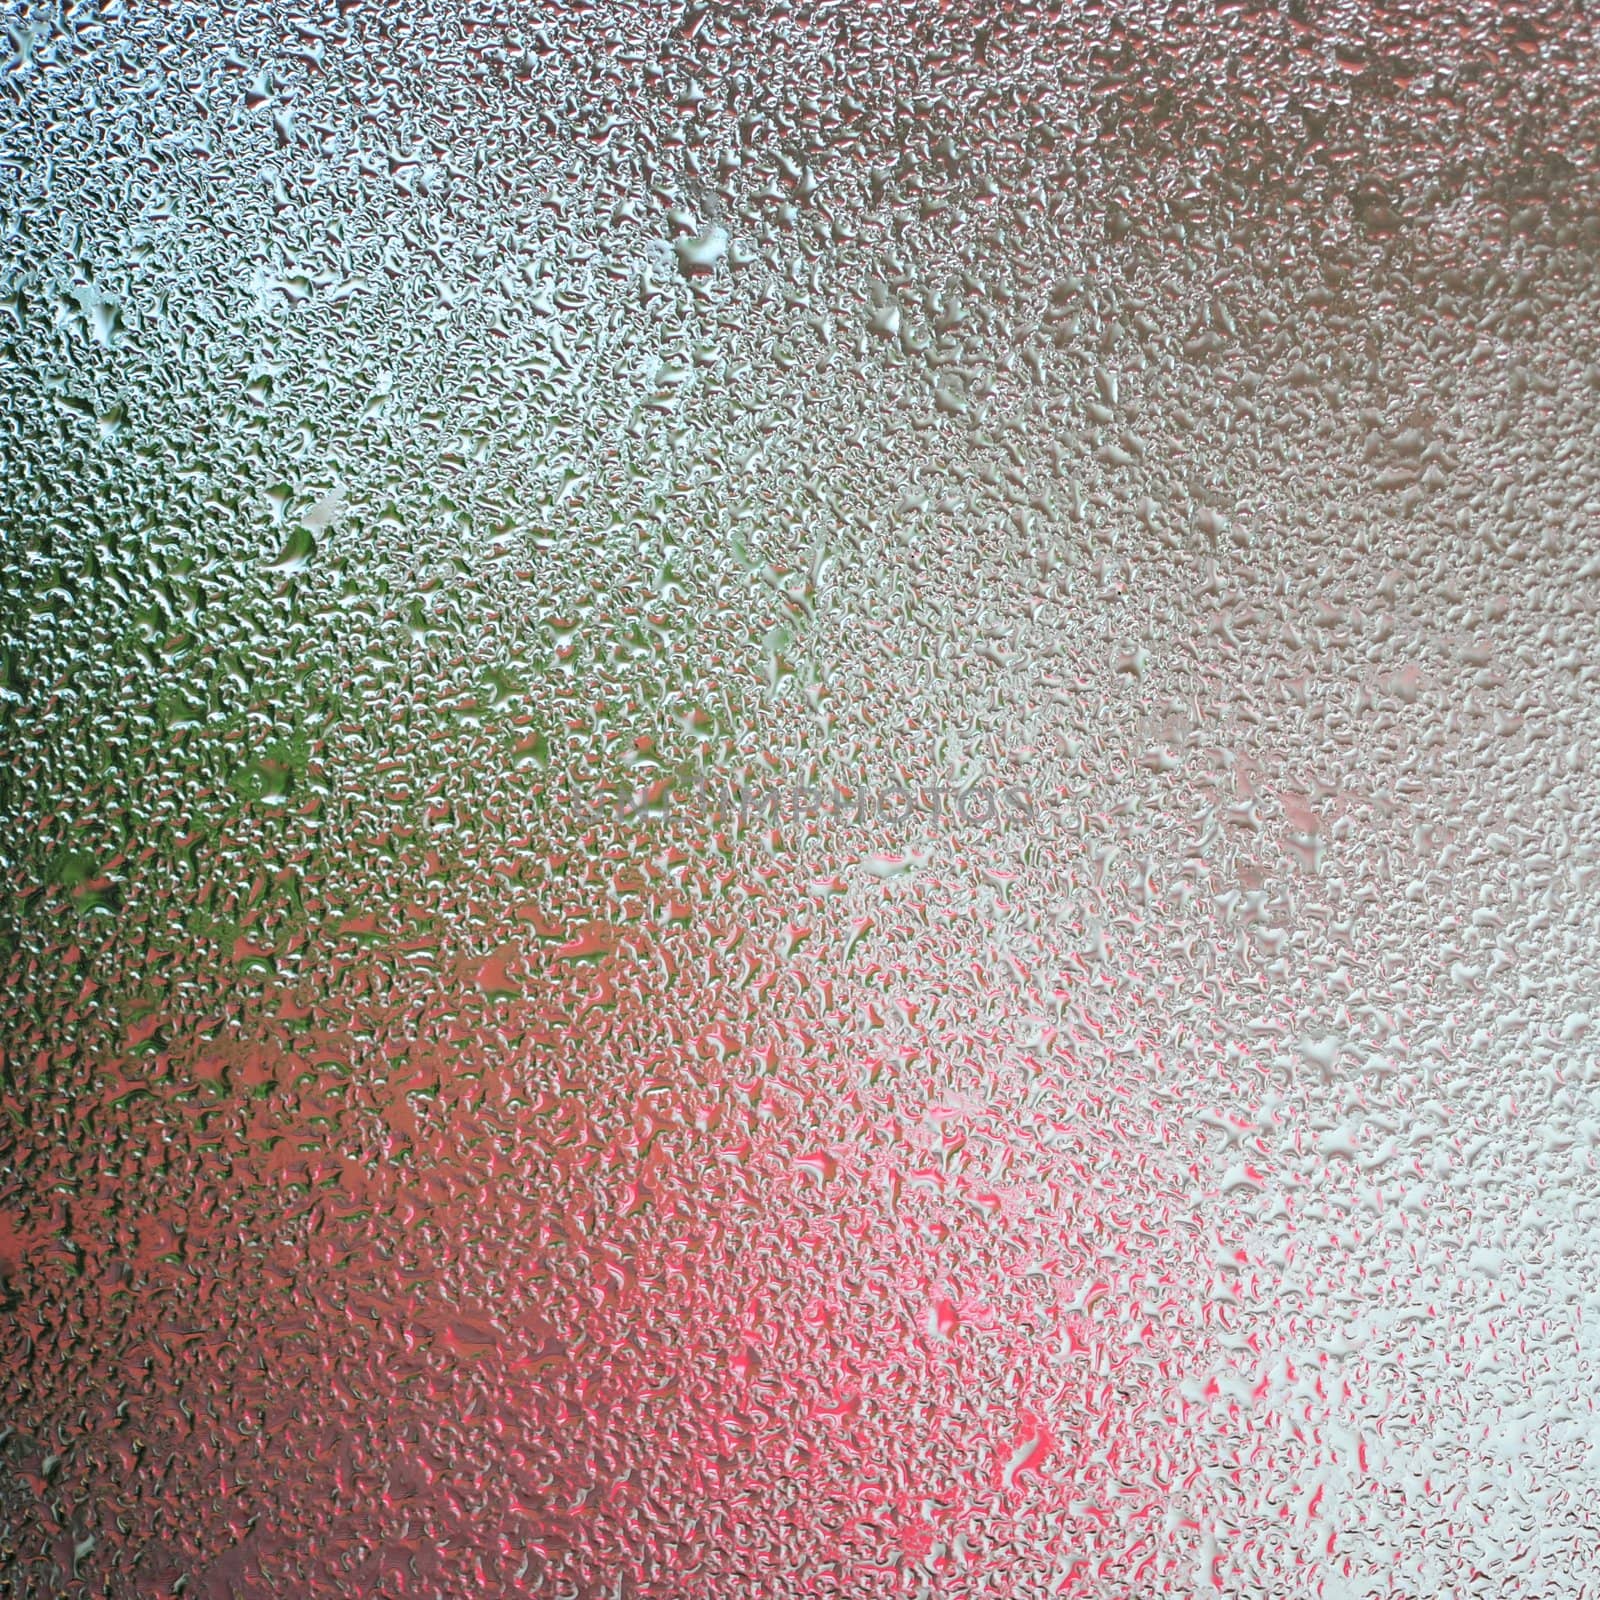 Water condensation by antpkr